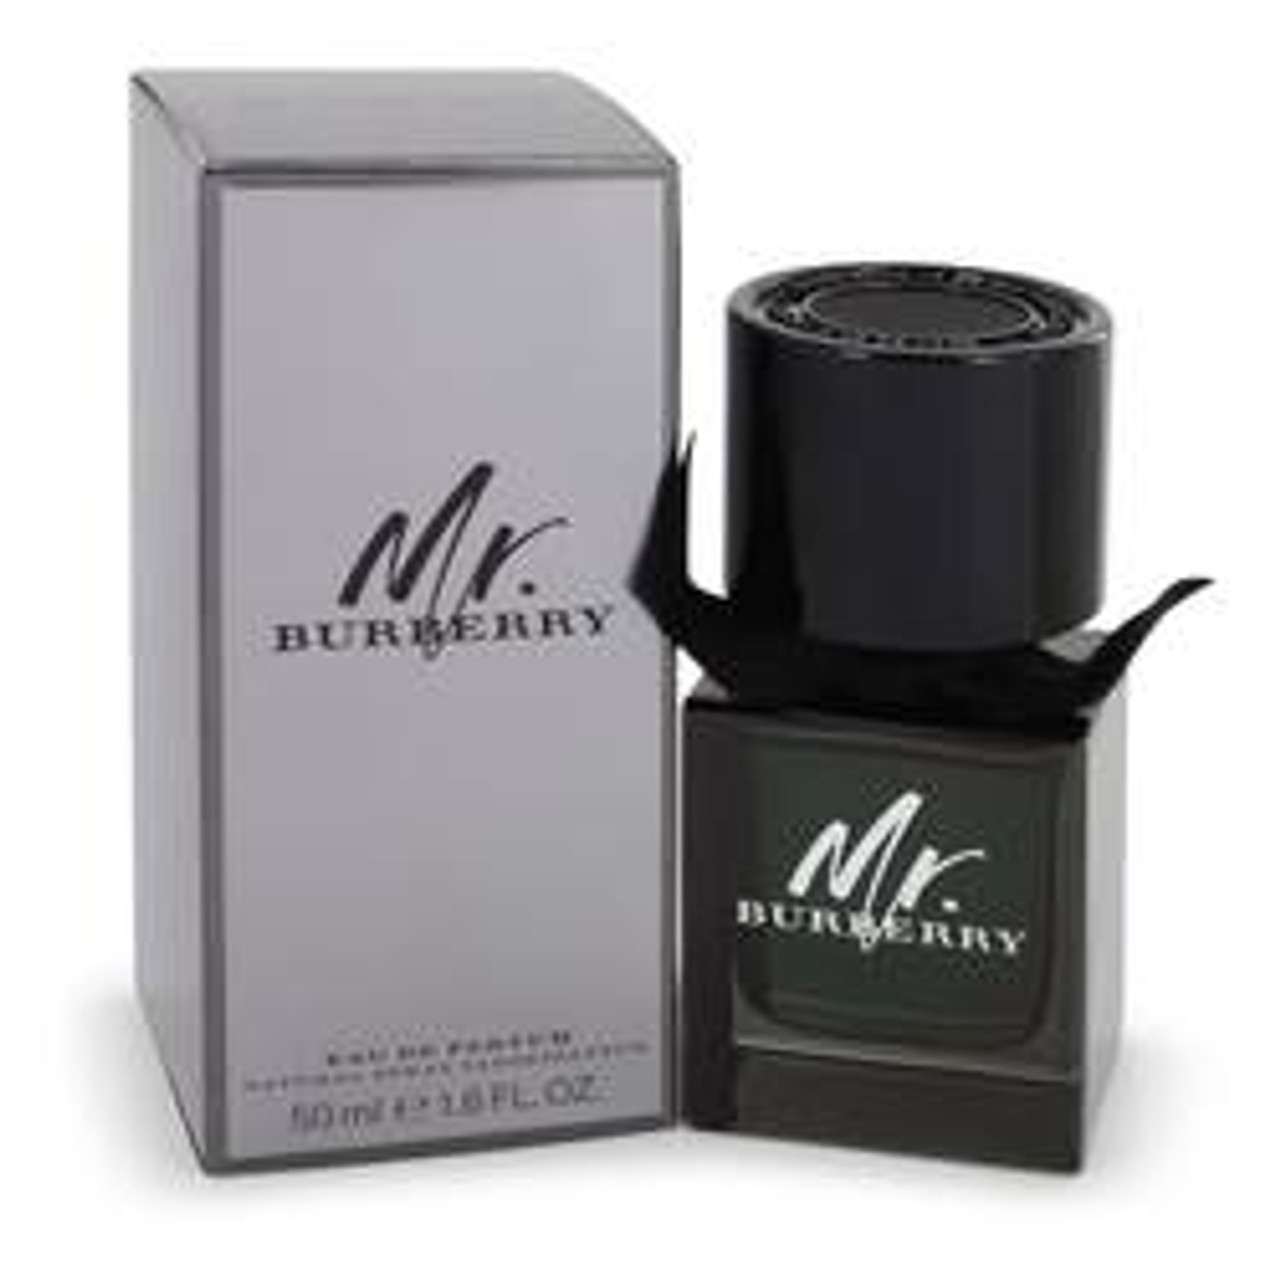 Mr Burberry Cologne By Burberry Eau De Parfum Spray 1.6 oz for Men - [From 148.00 - Choose pk Qty ] - *Ships from Miami